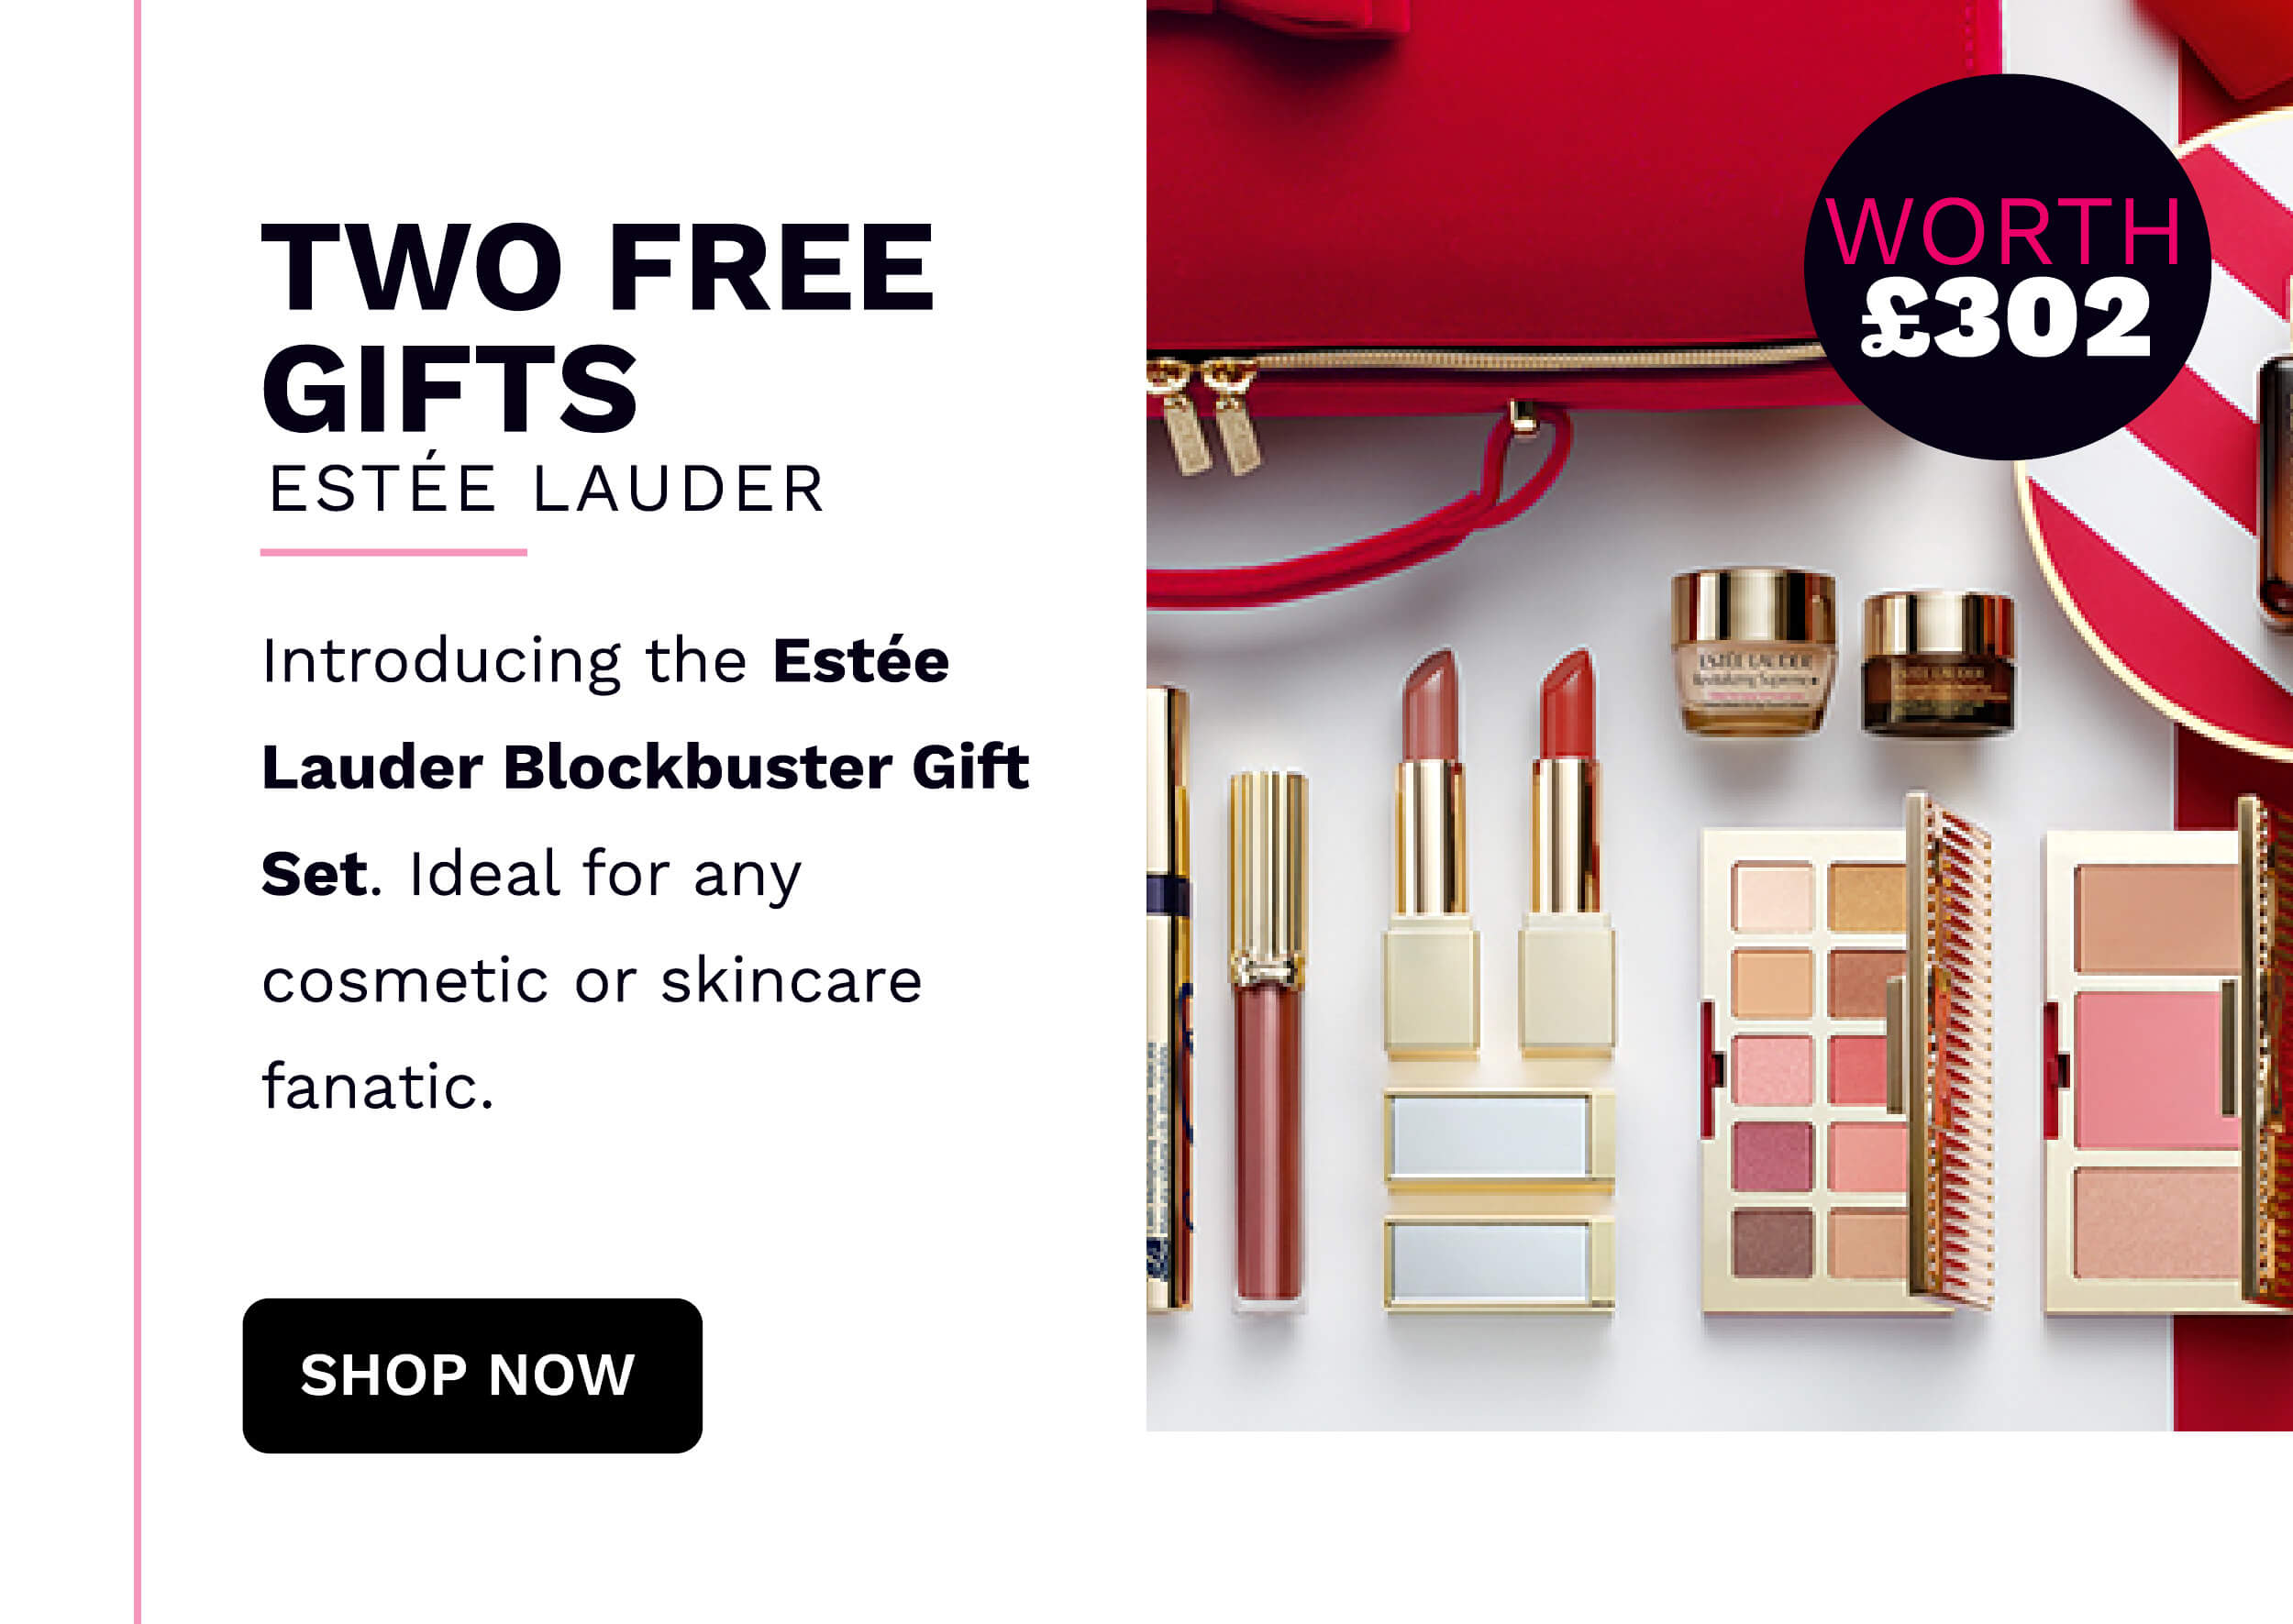 ESTEE LAUDER - TWO FREE GIFTS WORTH 3114